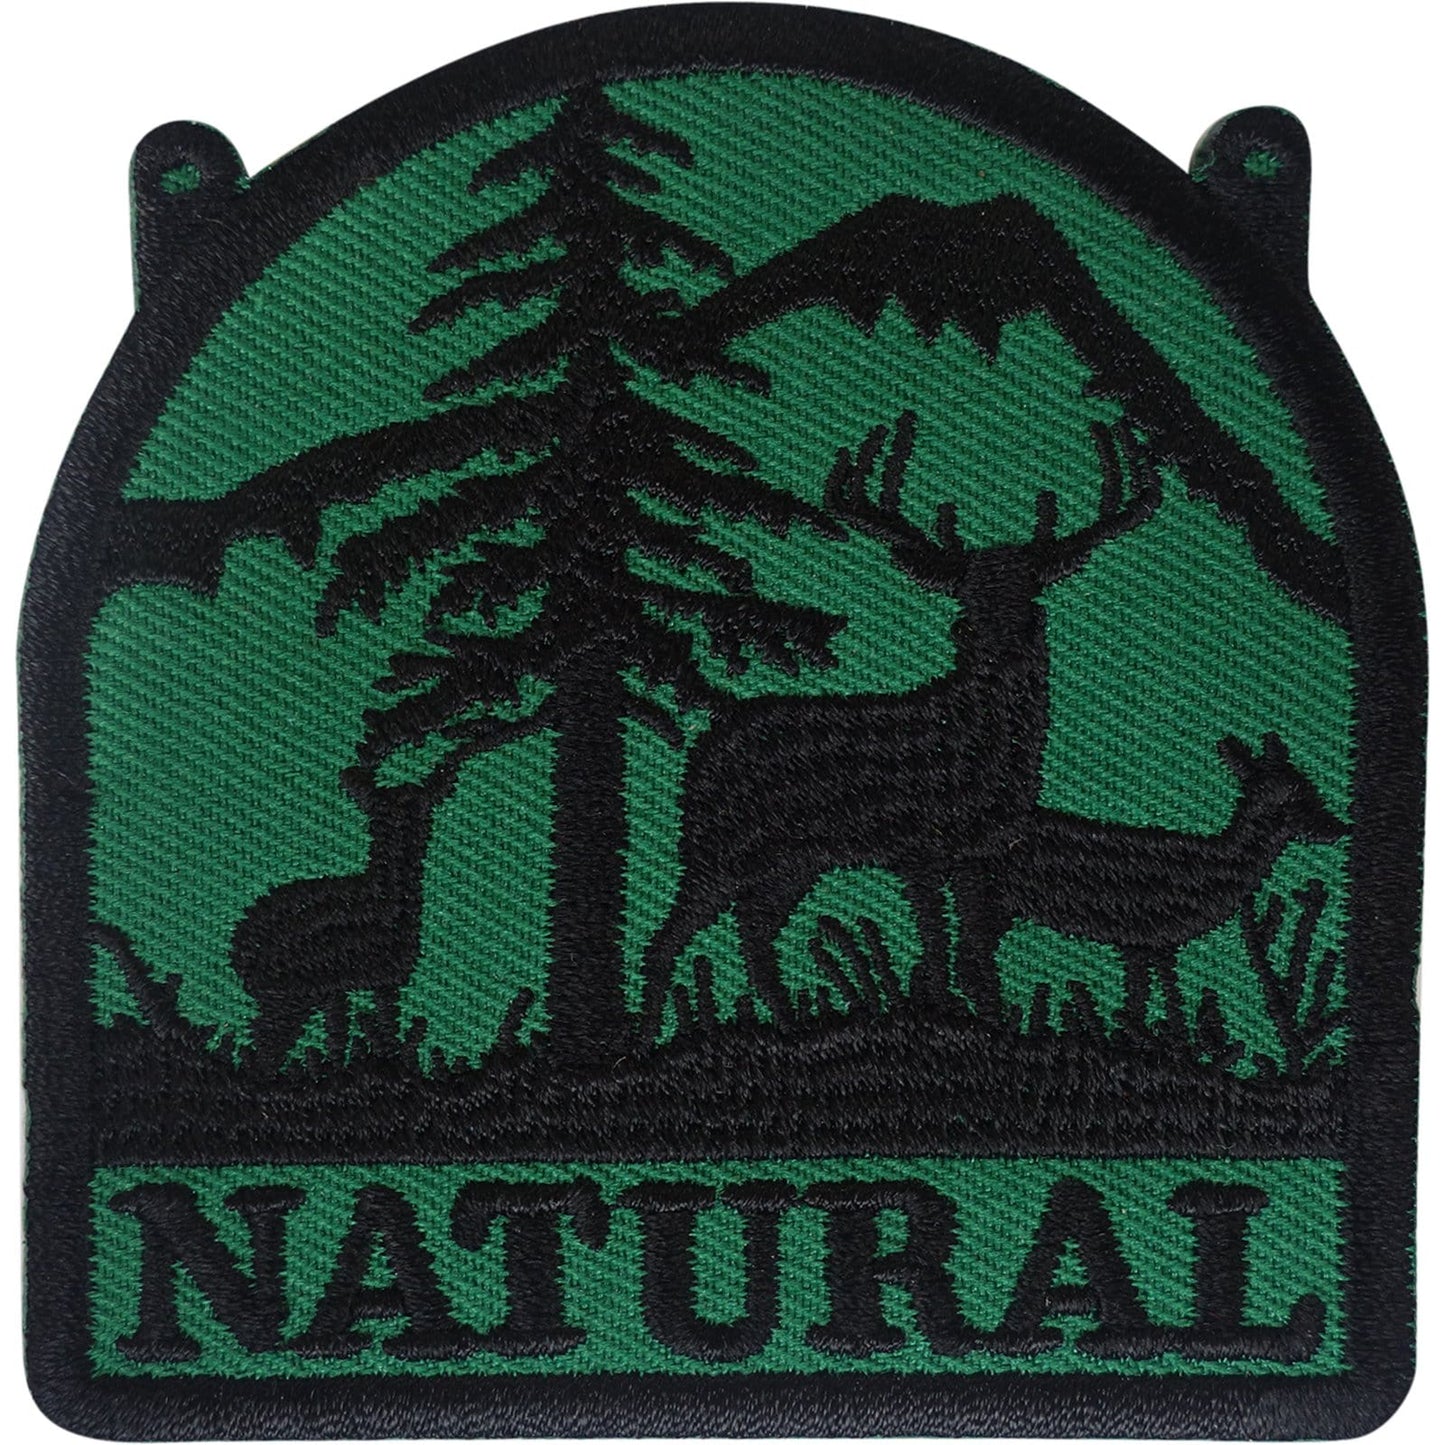 Natural Patch Iron Sew On Clothes Reindeer Stag Tree Outdoors Embroidered Badge